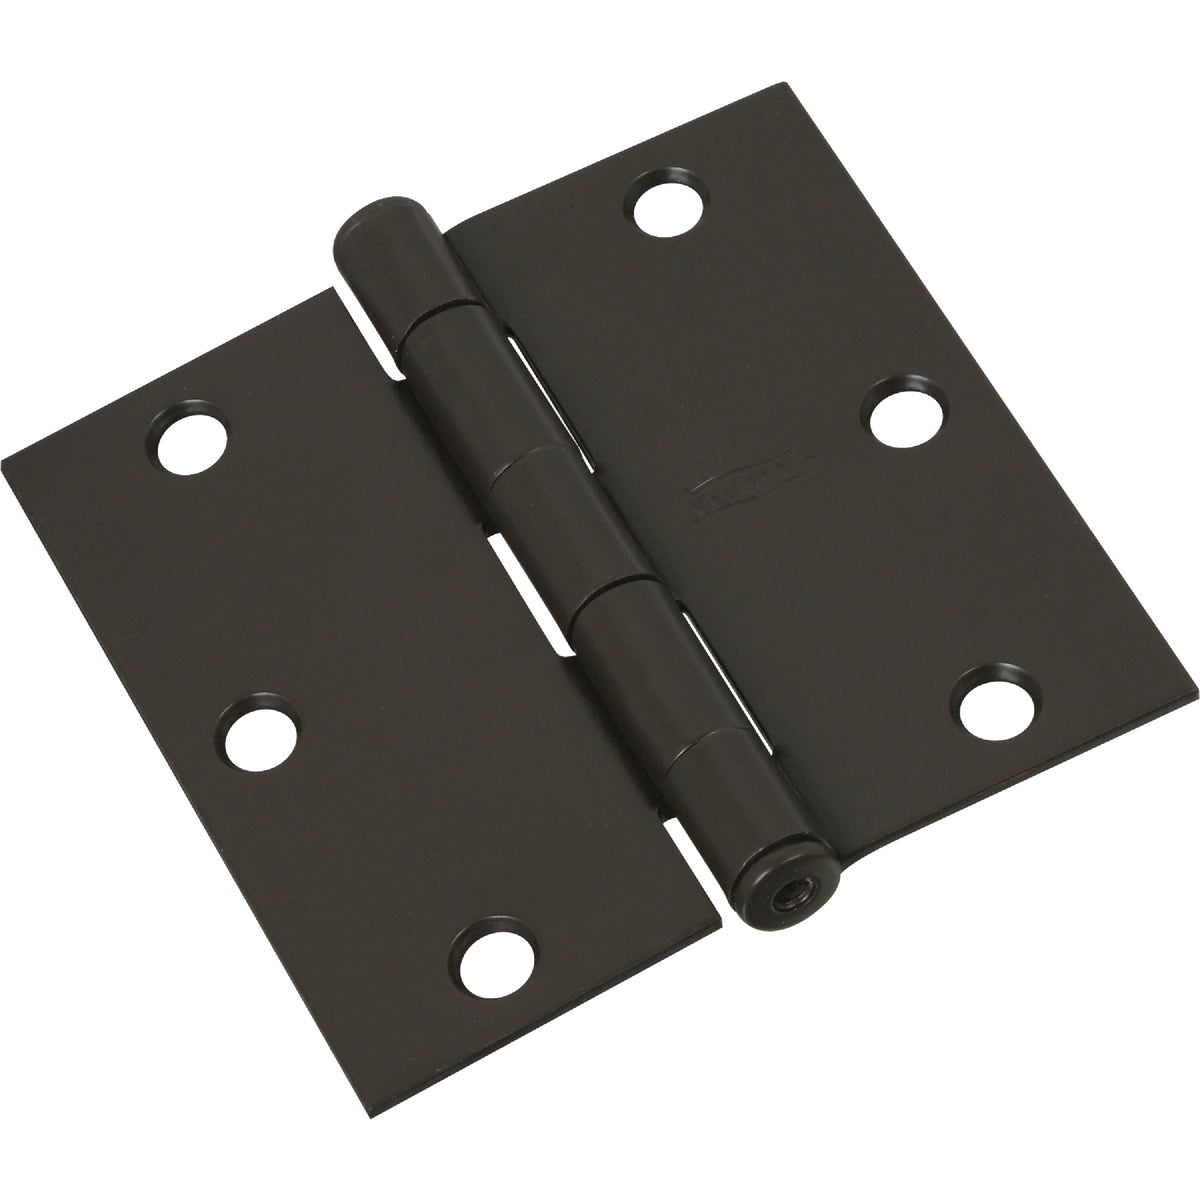 National 3-1/2 In. Square Oil Rubbed Bronze Door Hinge (3-Pack)